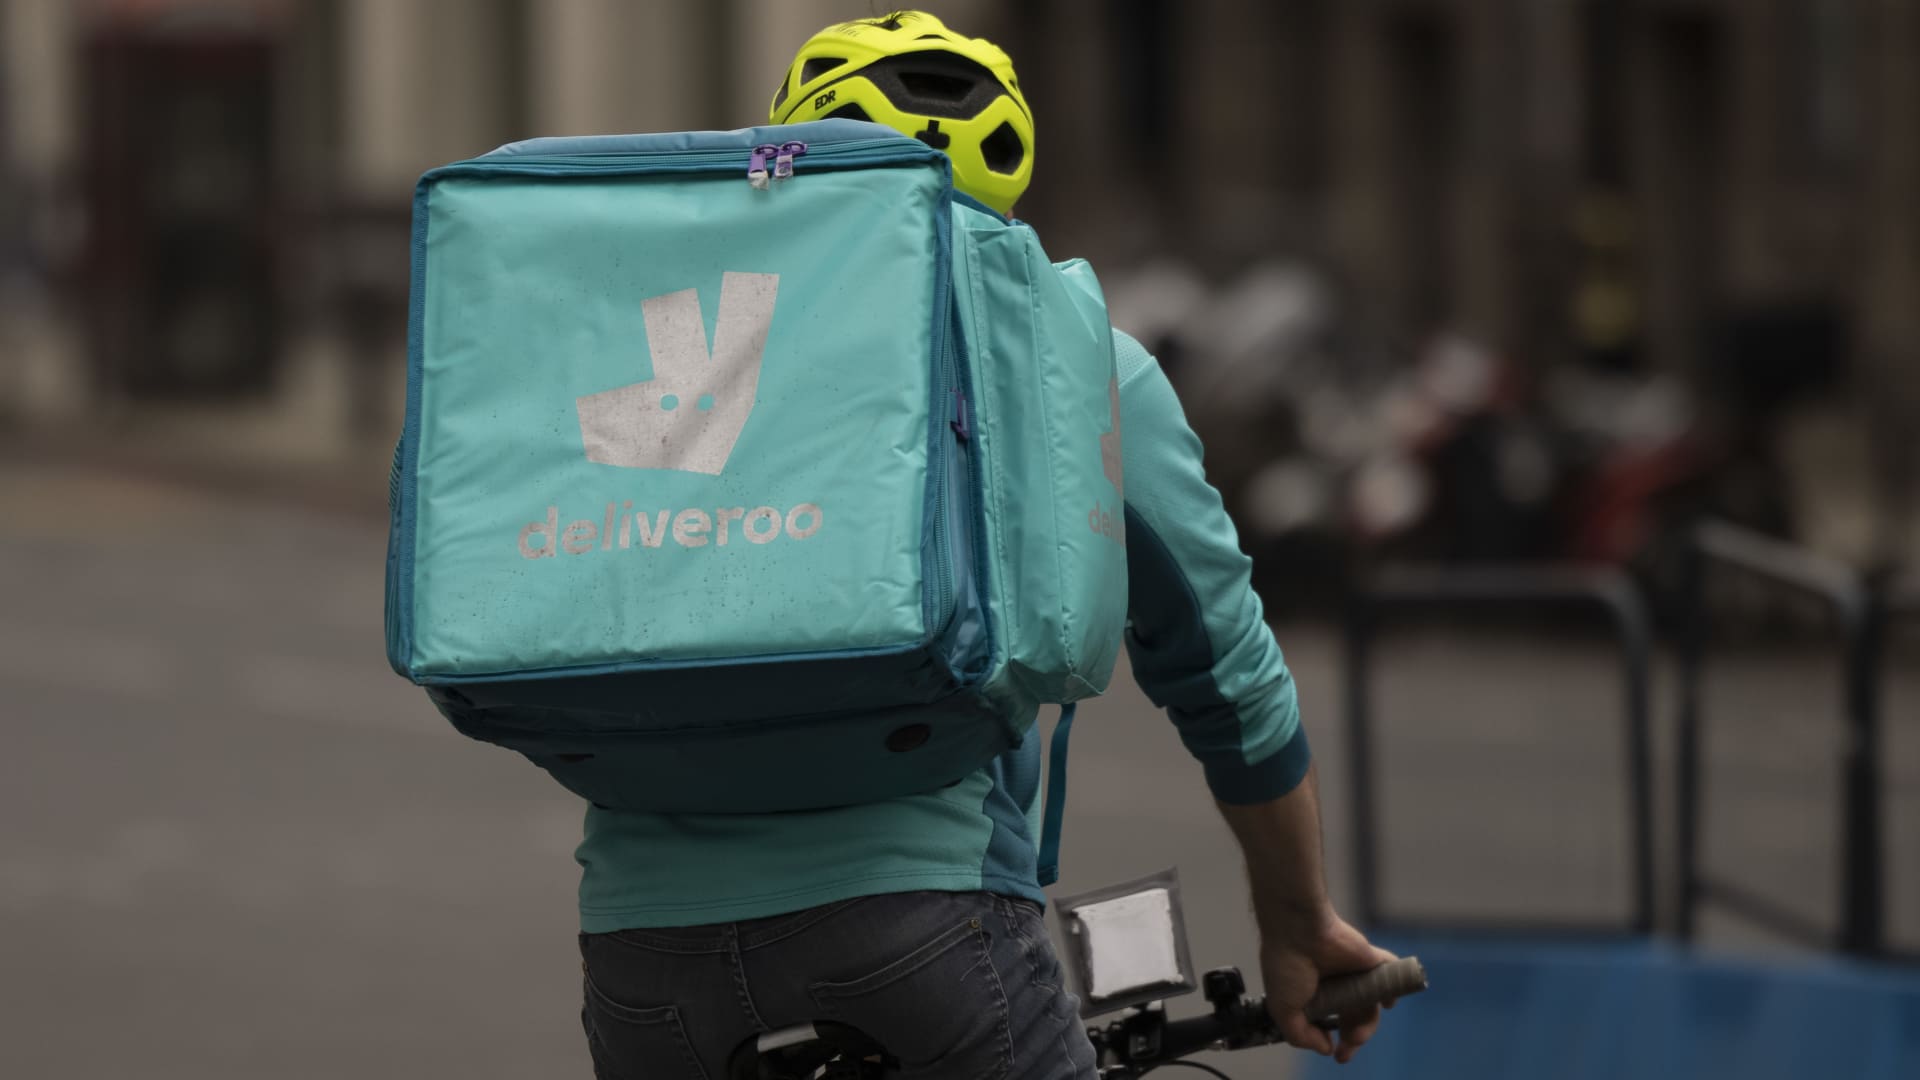 Early Deliveroo investor Hoxton Ventures is set to lose one of its founding partners